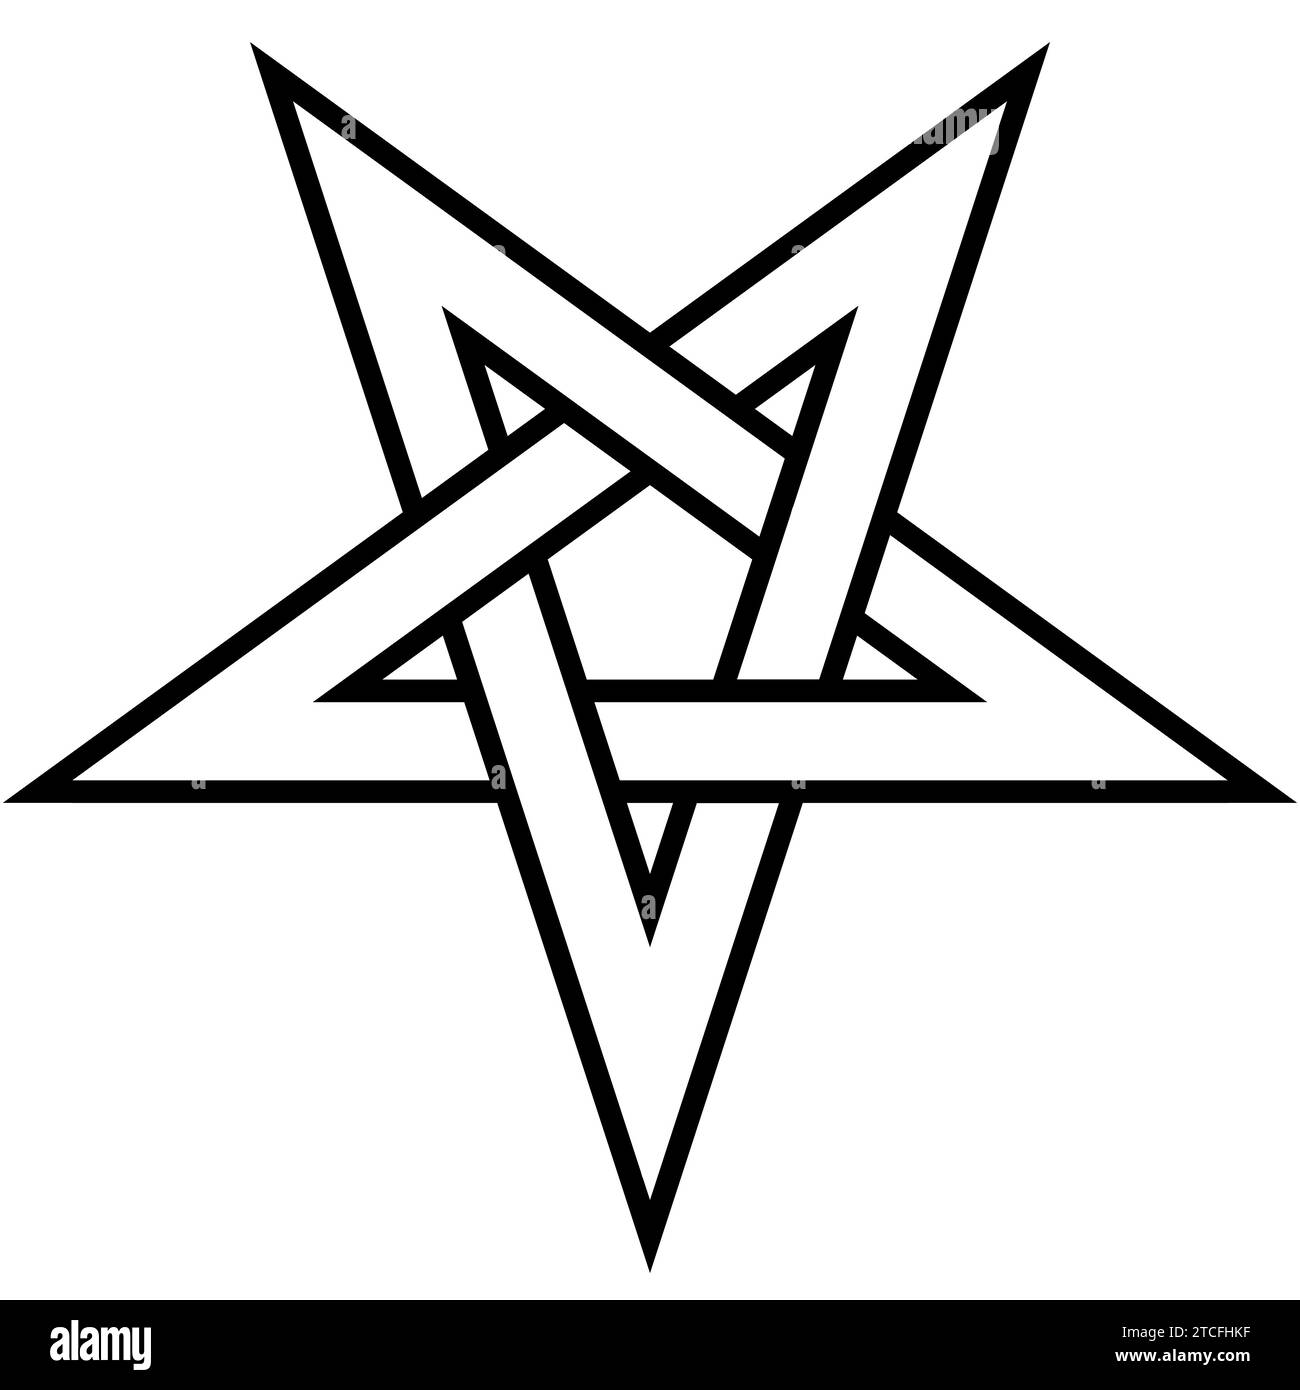 Pentagram - black and white vector illustration of simple five-pointed star, isolated on white Stock Vector